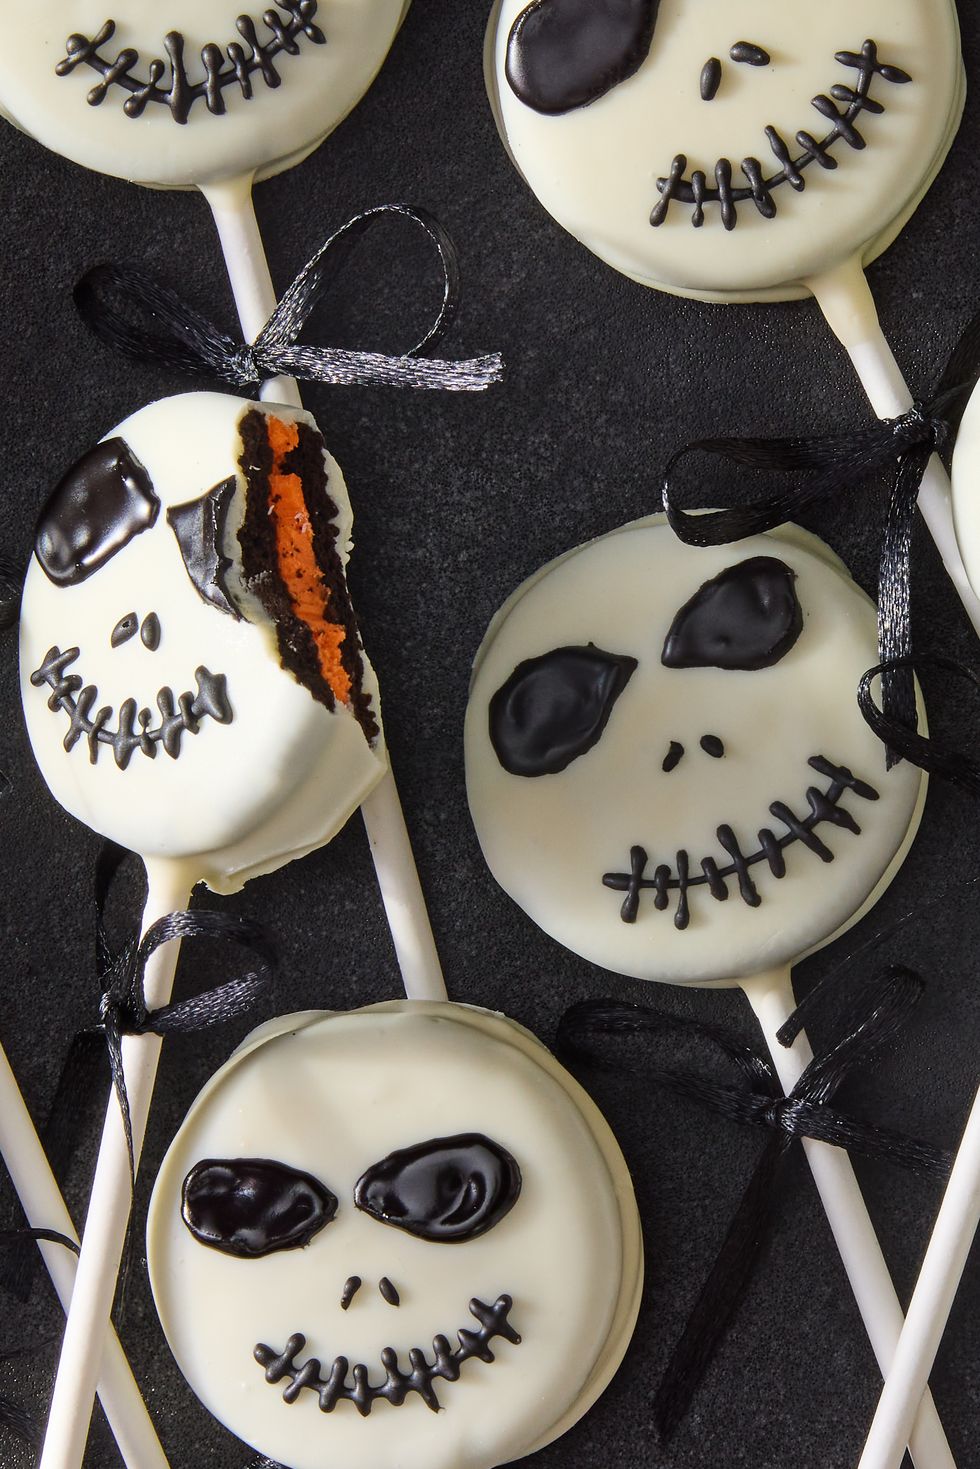 white chocolate covered oreo pops decorated as jack skellington with icing